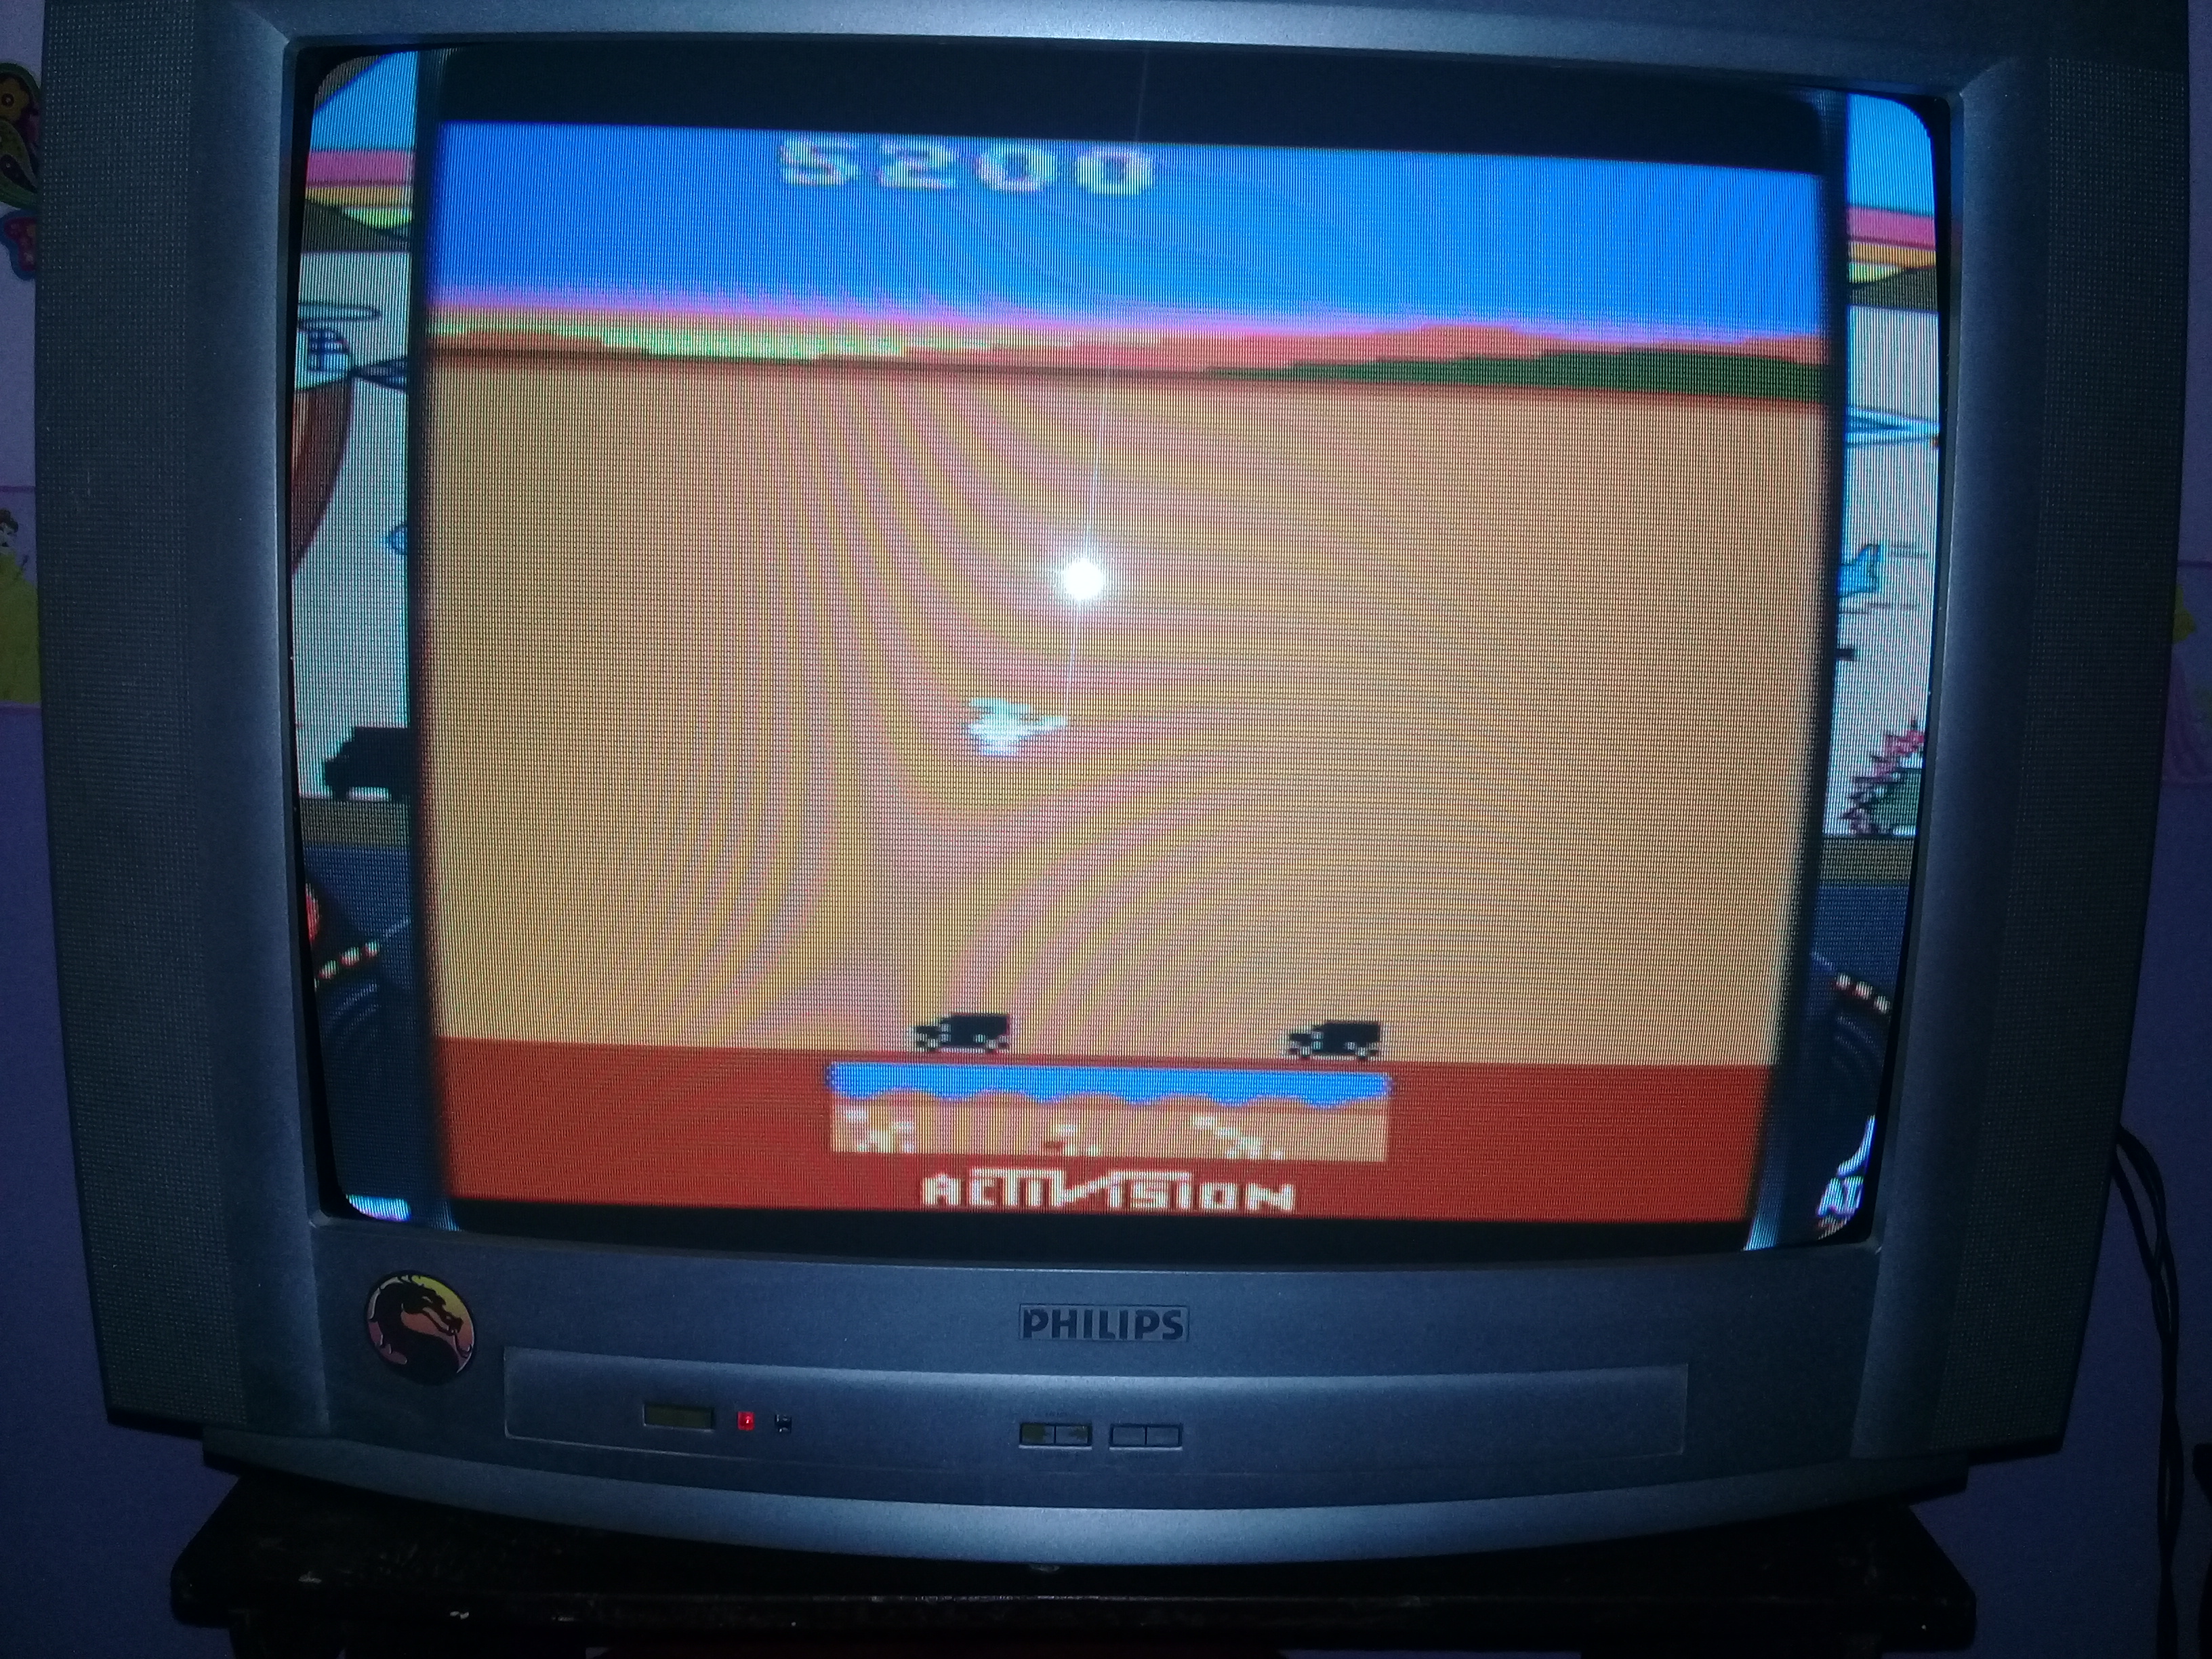 omargeddon: Chopper Command: Game 3 [1 Life Only] (Atari 2600 Emulated Novice/B Mode) 5,200 points on 2020-06-20 17:50:26